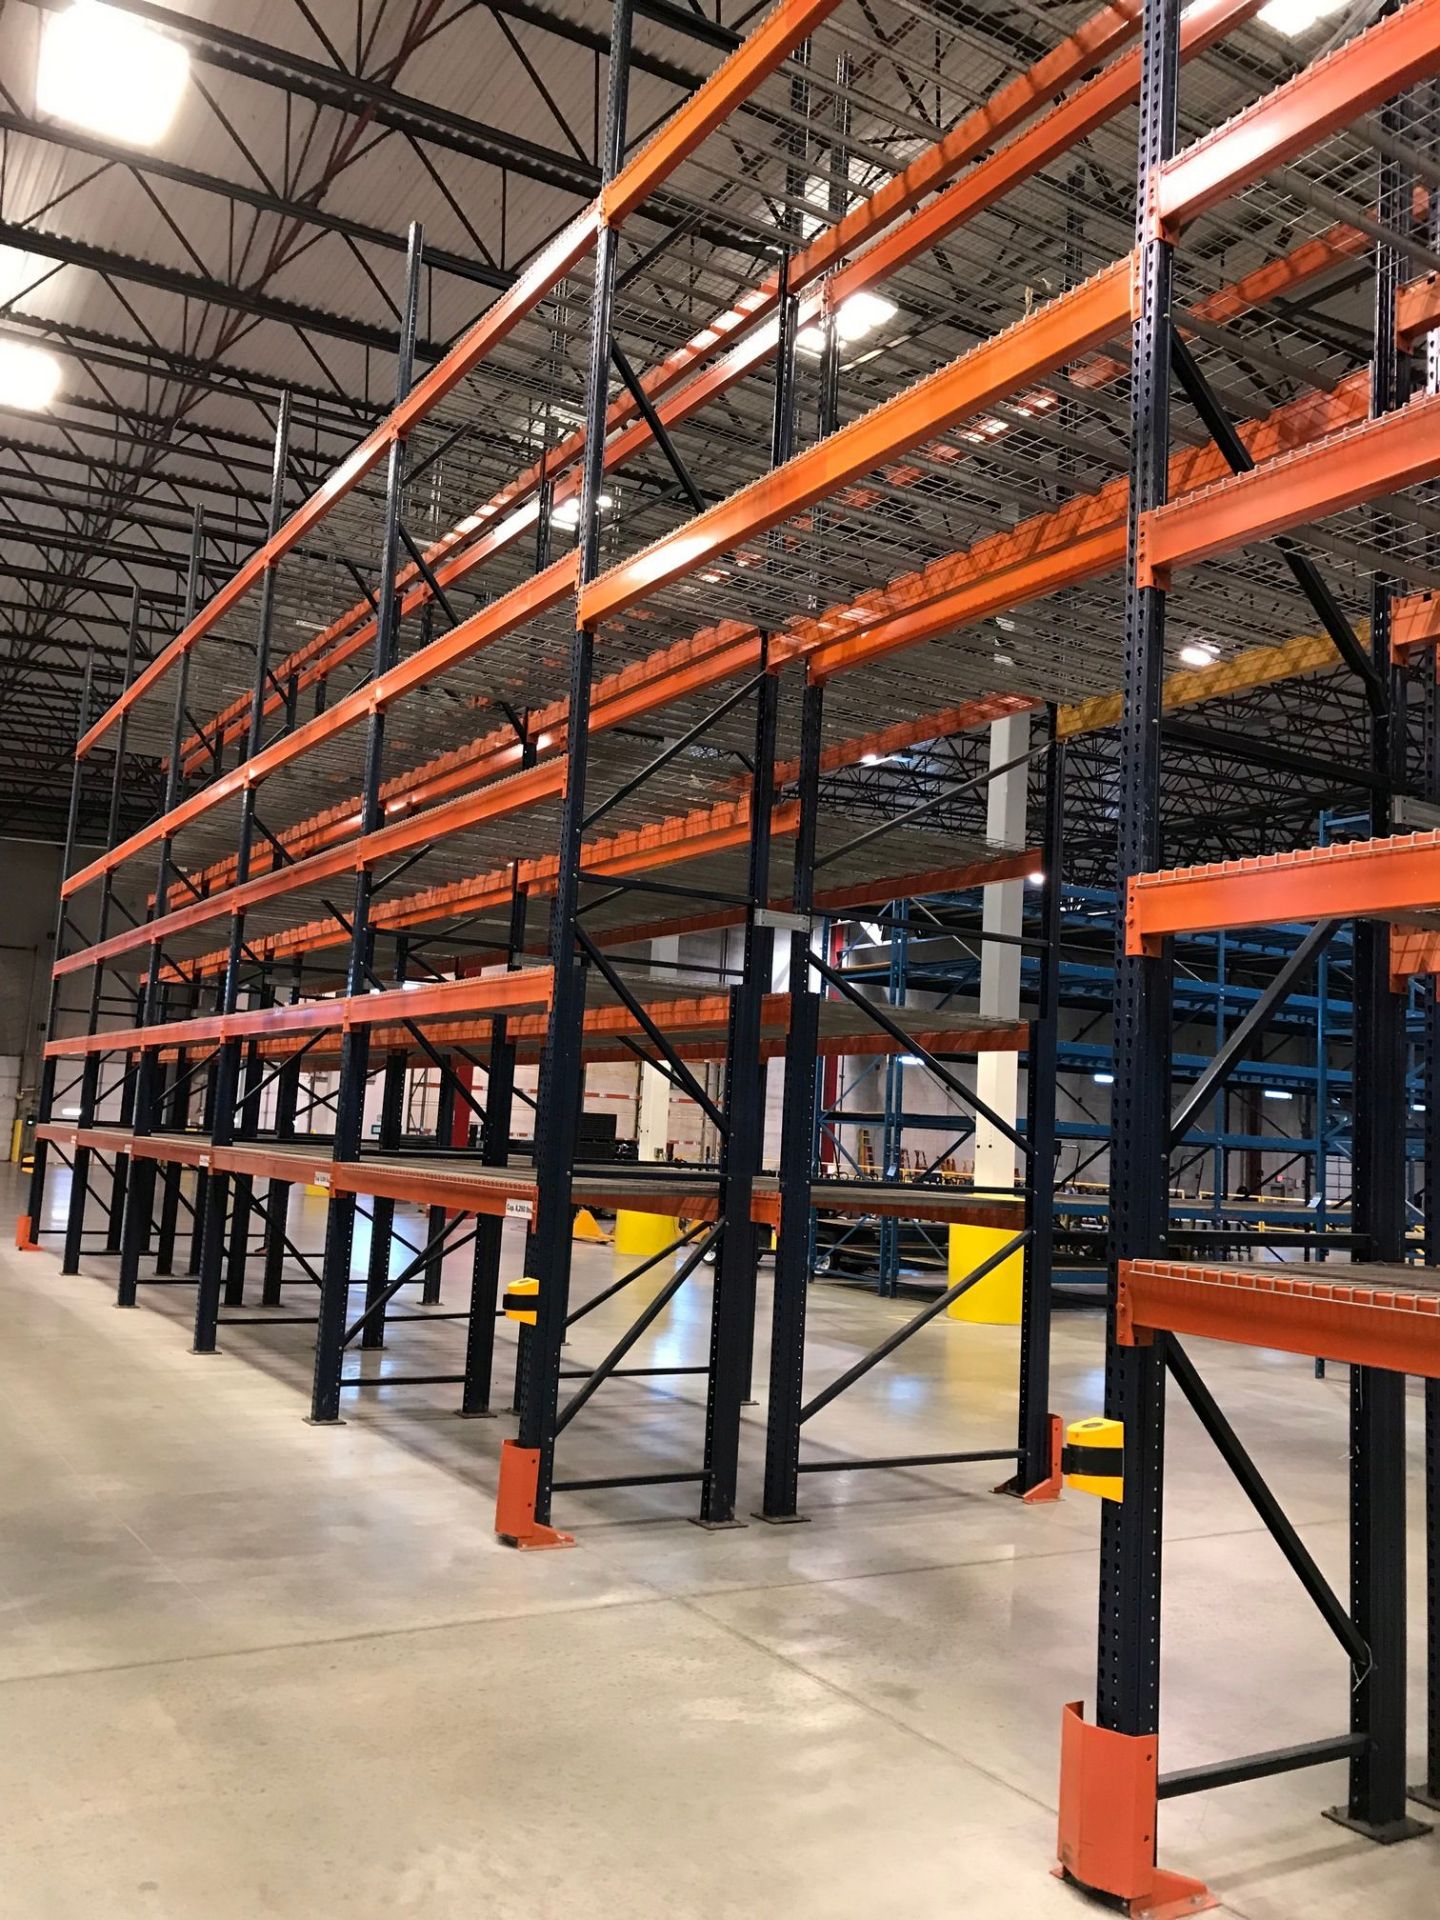 SECTIONS 60" X 108" X 288" TEARDROP TYPE ADJUSTABLE BEAM PALLET RACK WITH WIRE DECKING, 6" HIGH - Image 10 of 13